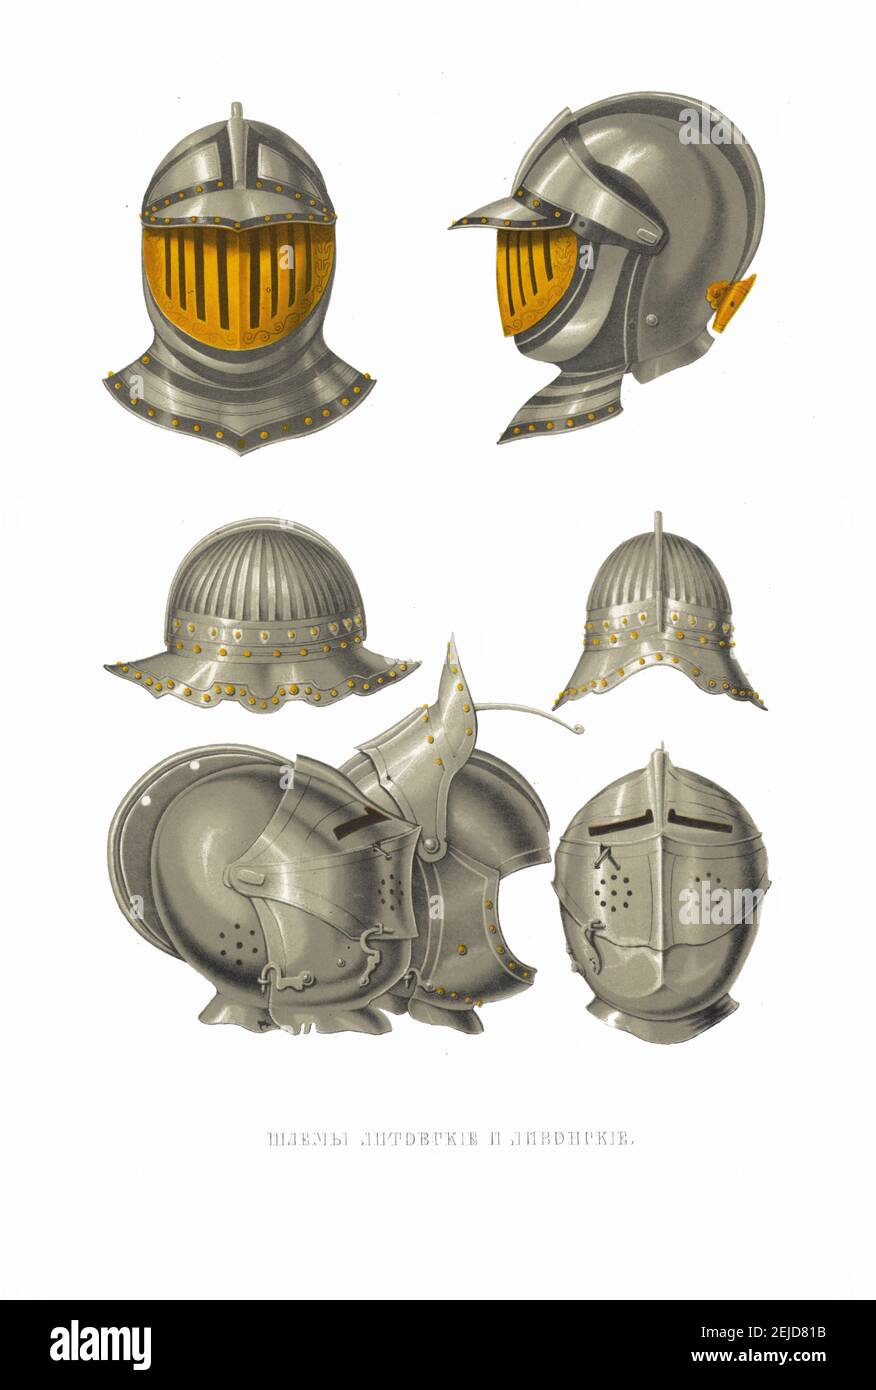 Lithuanian and Livonian helmets. From the Antiquities of the Russian State. Museum: PRIVATE COLLECTION. Author: Fyodor Grigoryevich Solntsev. Stock Photo